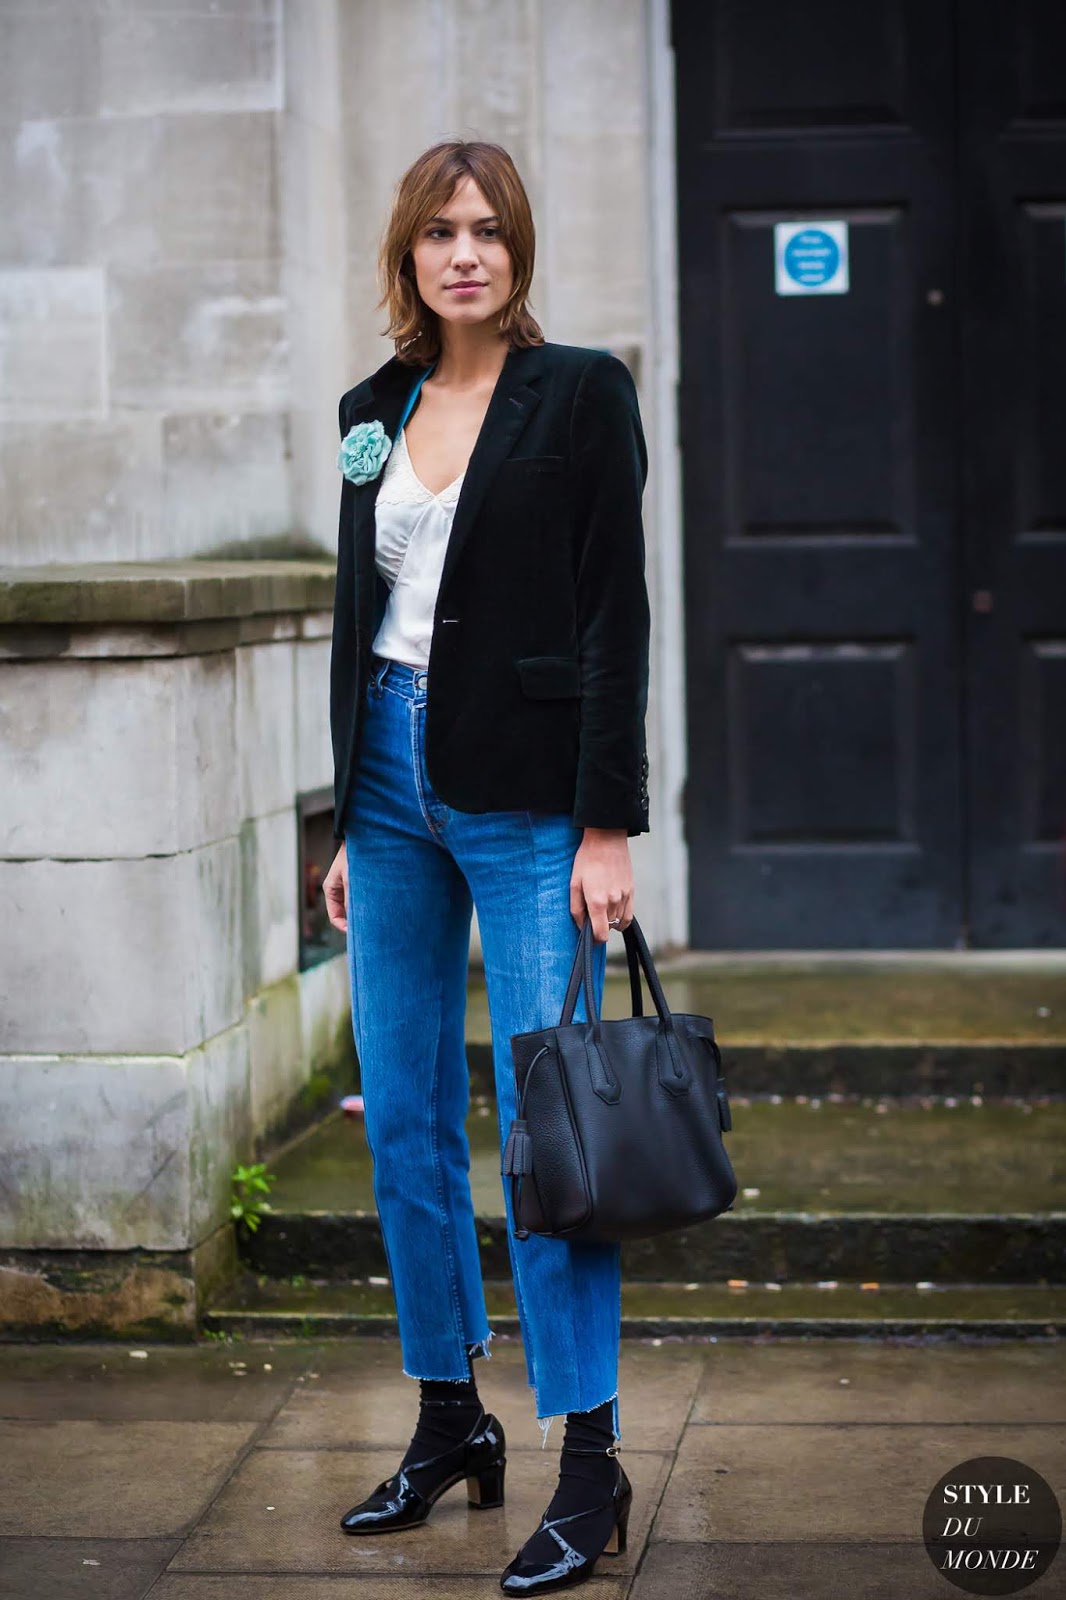 Alexa Chung Has Found the Perfect Day-to-Night Outfit